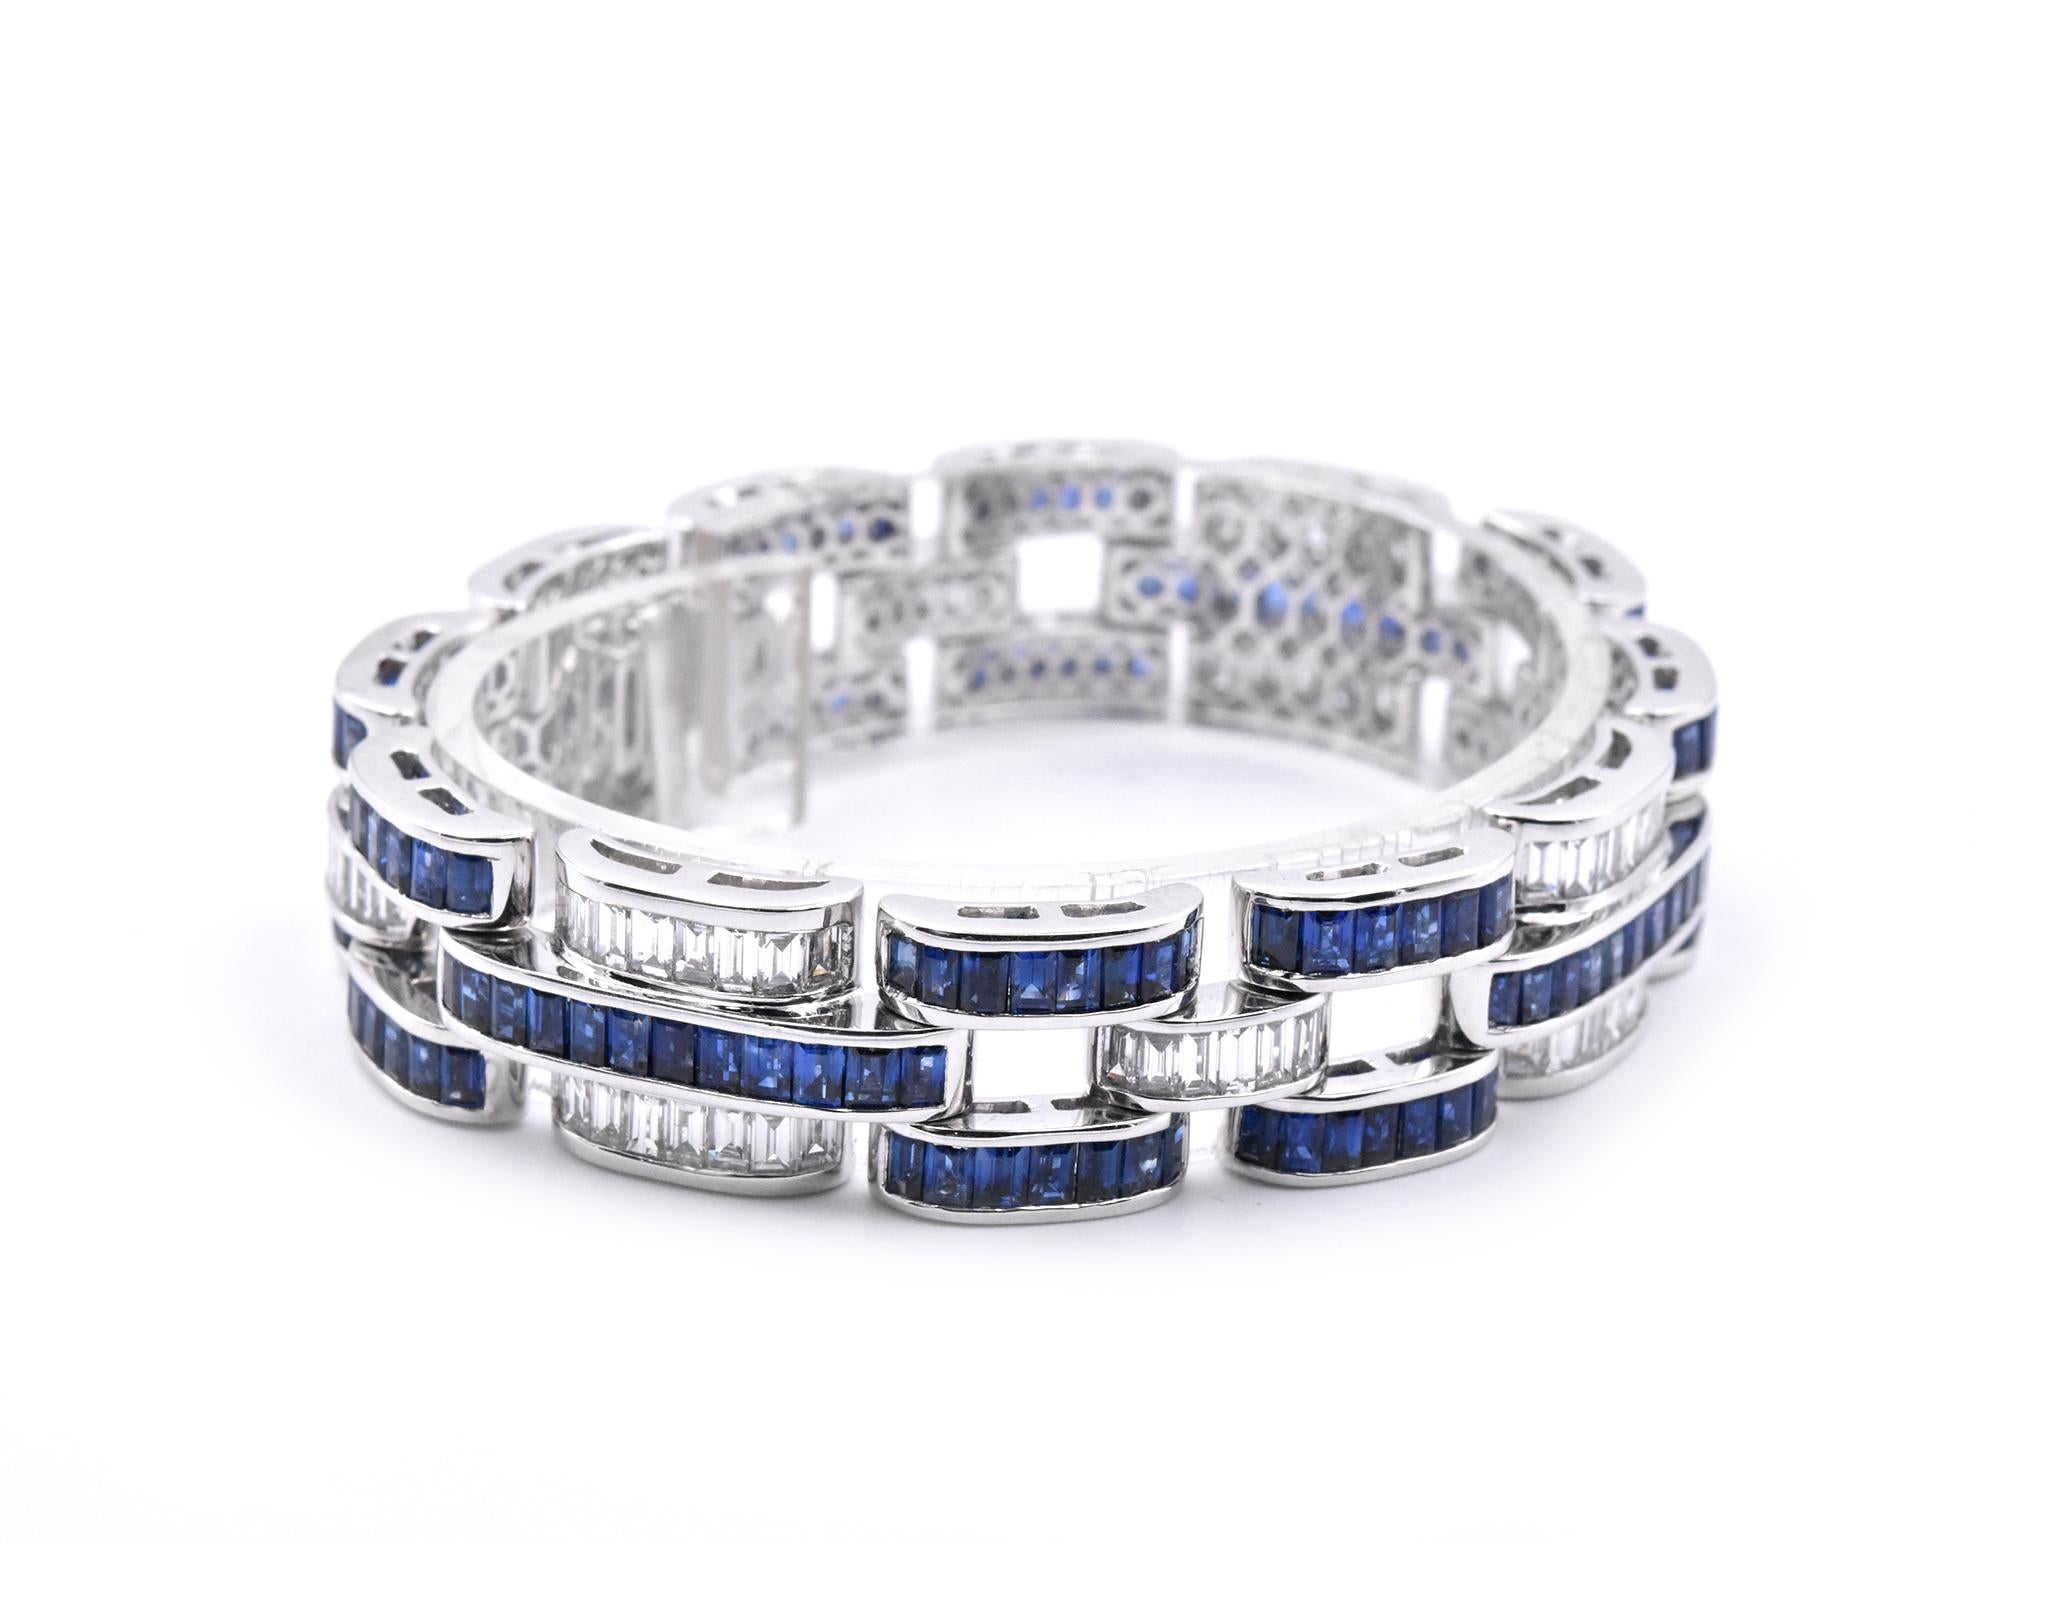 Material: platinum
Sapphire: 164 baguette cut sapphires = 16.83cttw
Diamonds: 92 baguette cut diamonds = 5.74cttw
Color: G-H
Clarity: VS
Dimensions: bracelet will fit a 7-inch wrist, measures 12.80mm in width
Weight: 67.20 grams